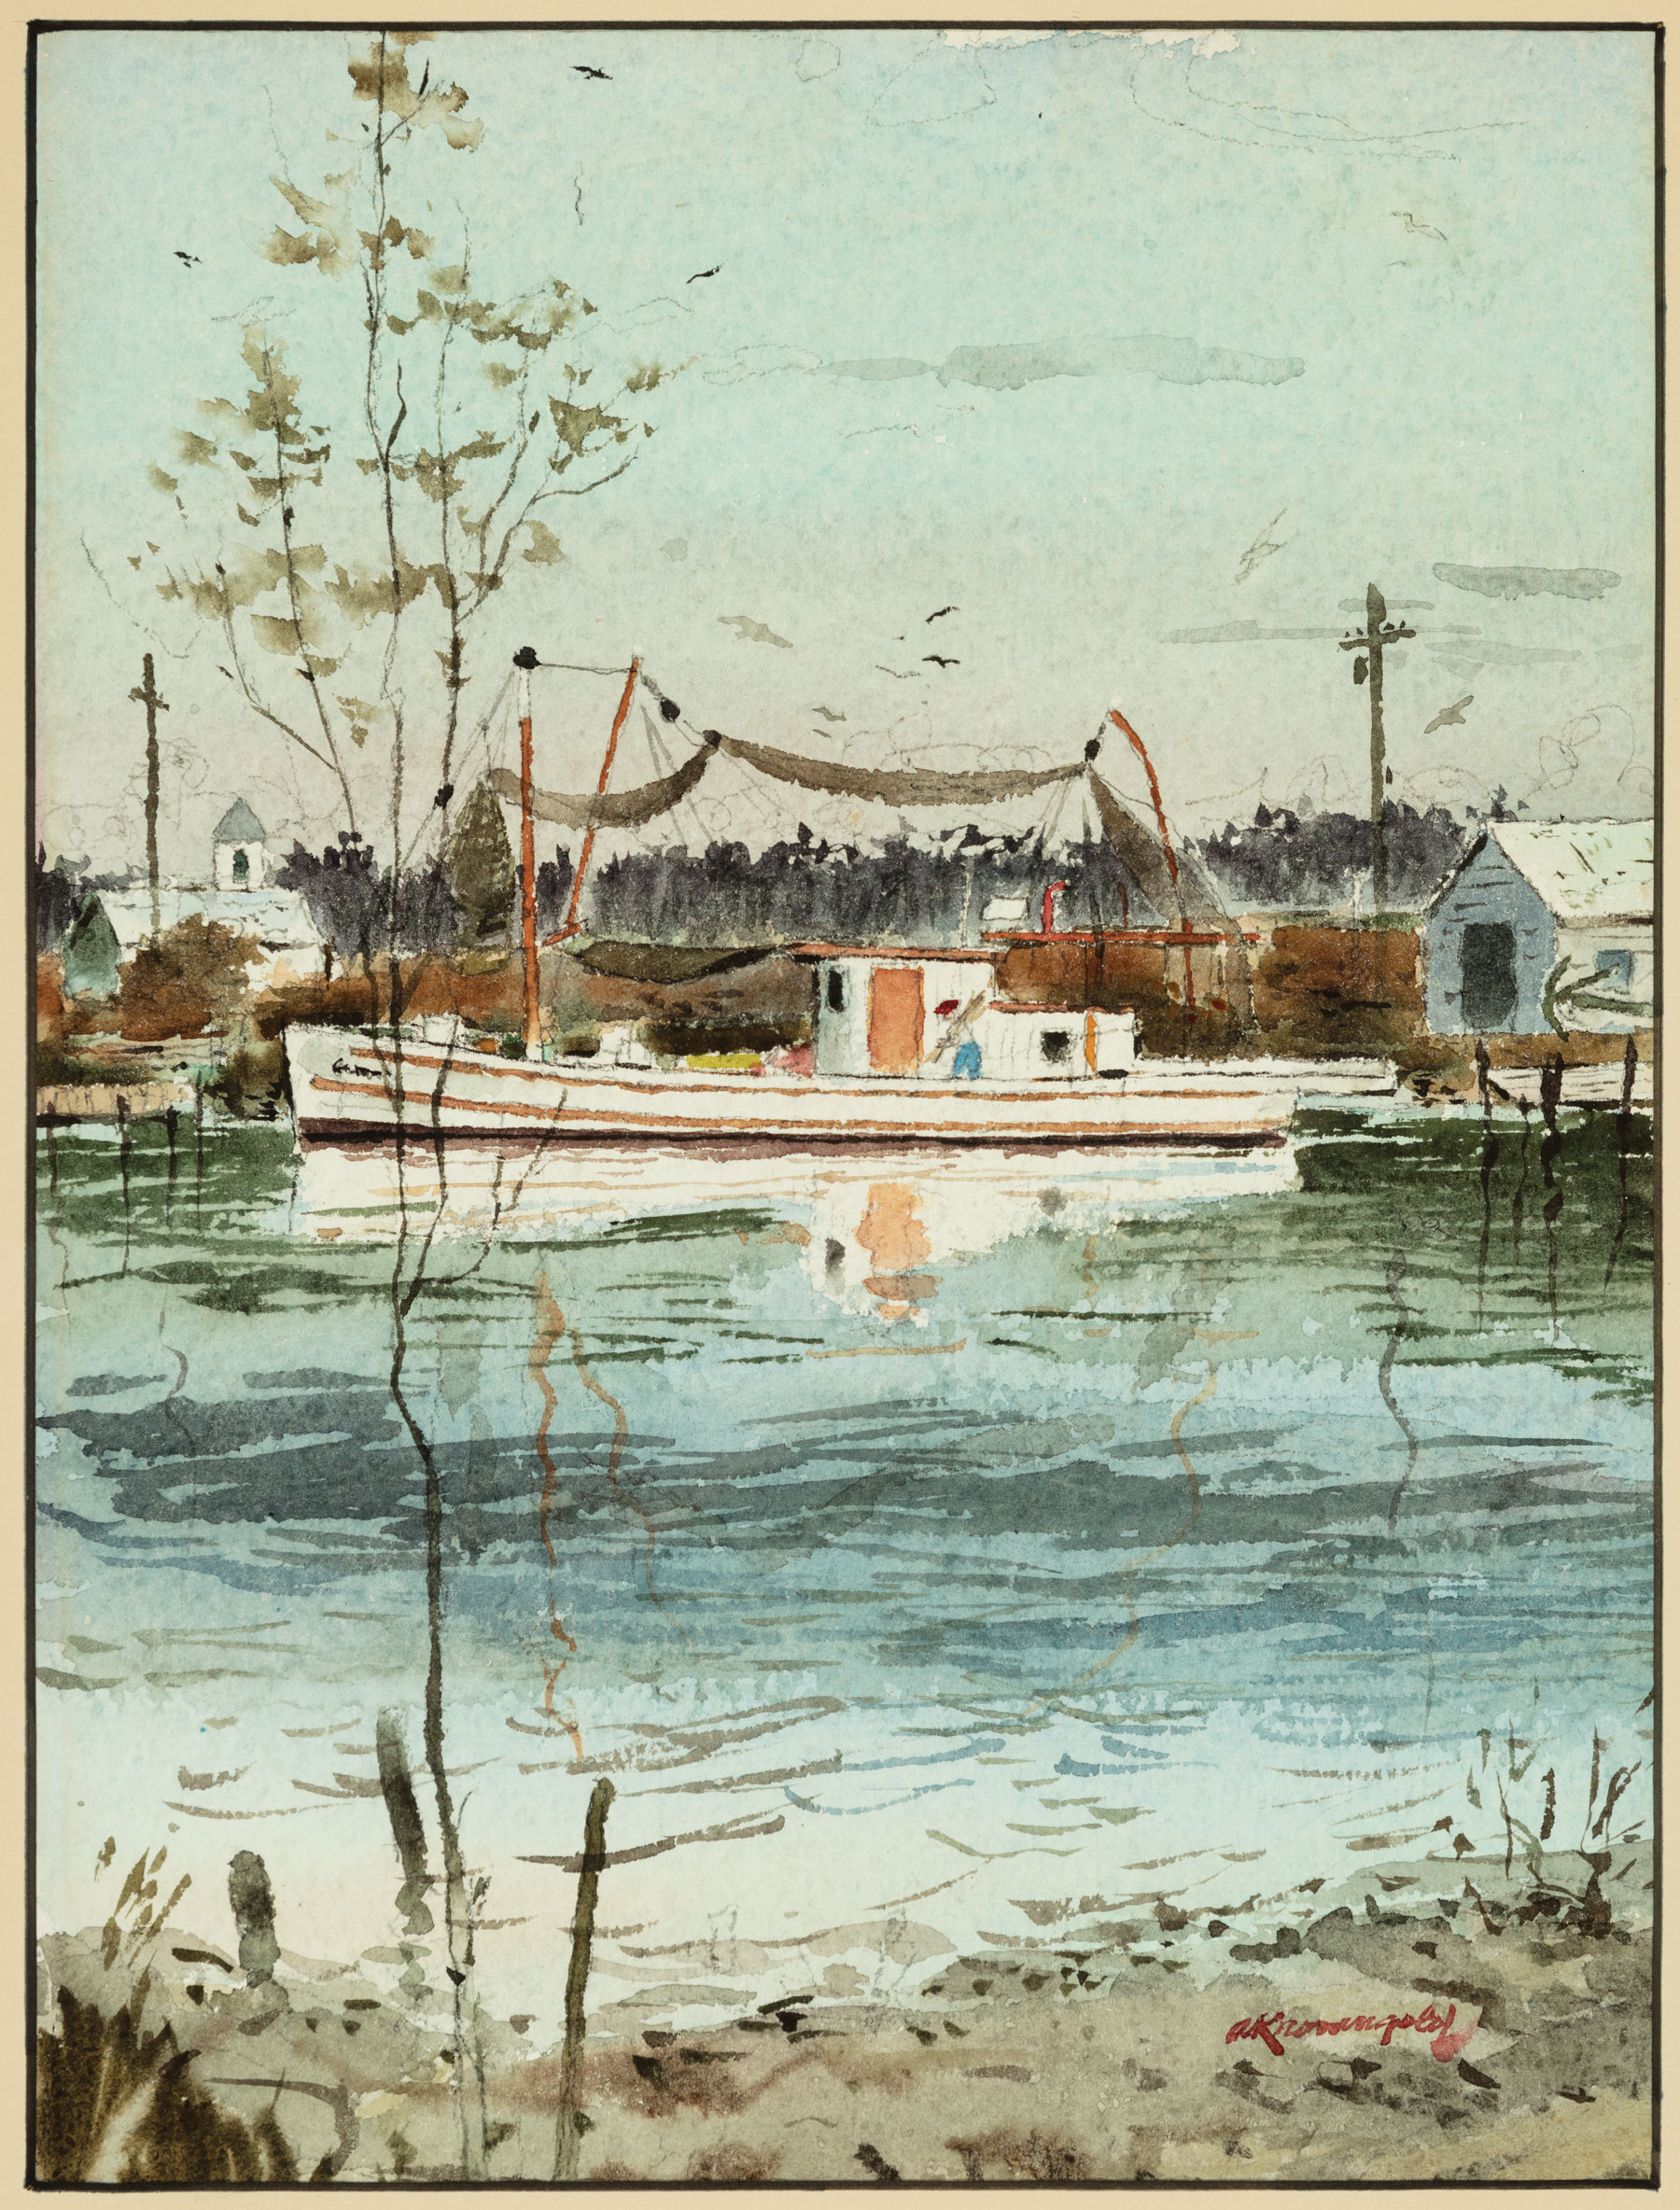 Adolph Kronengold (American/New Orleans, 1900-1986), "Shrimp Boat", watercolor on paper, signed